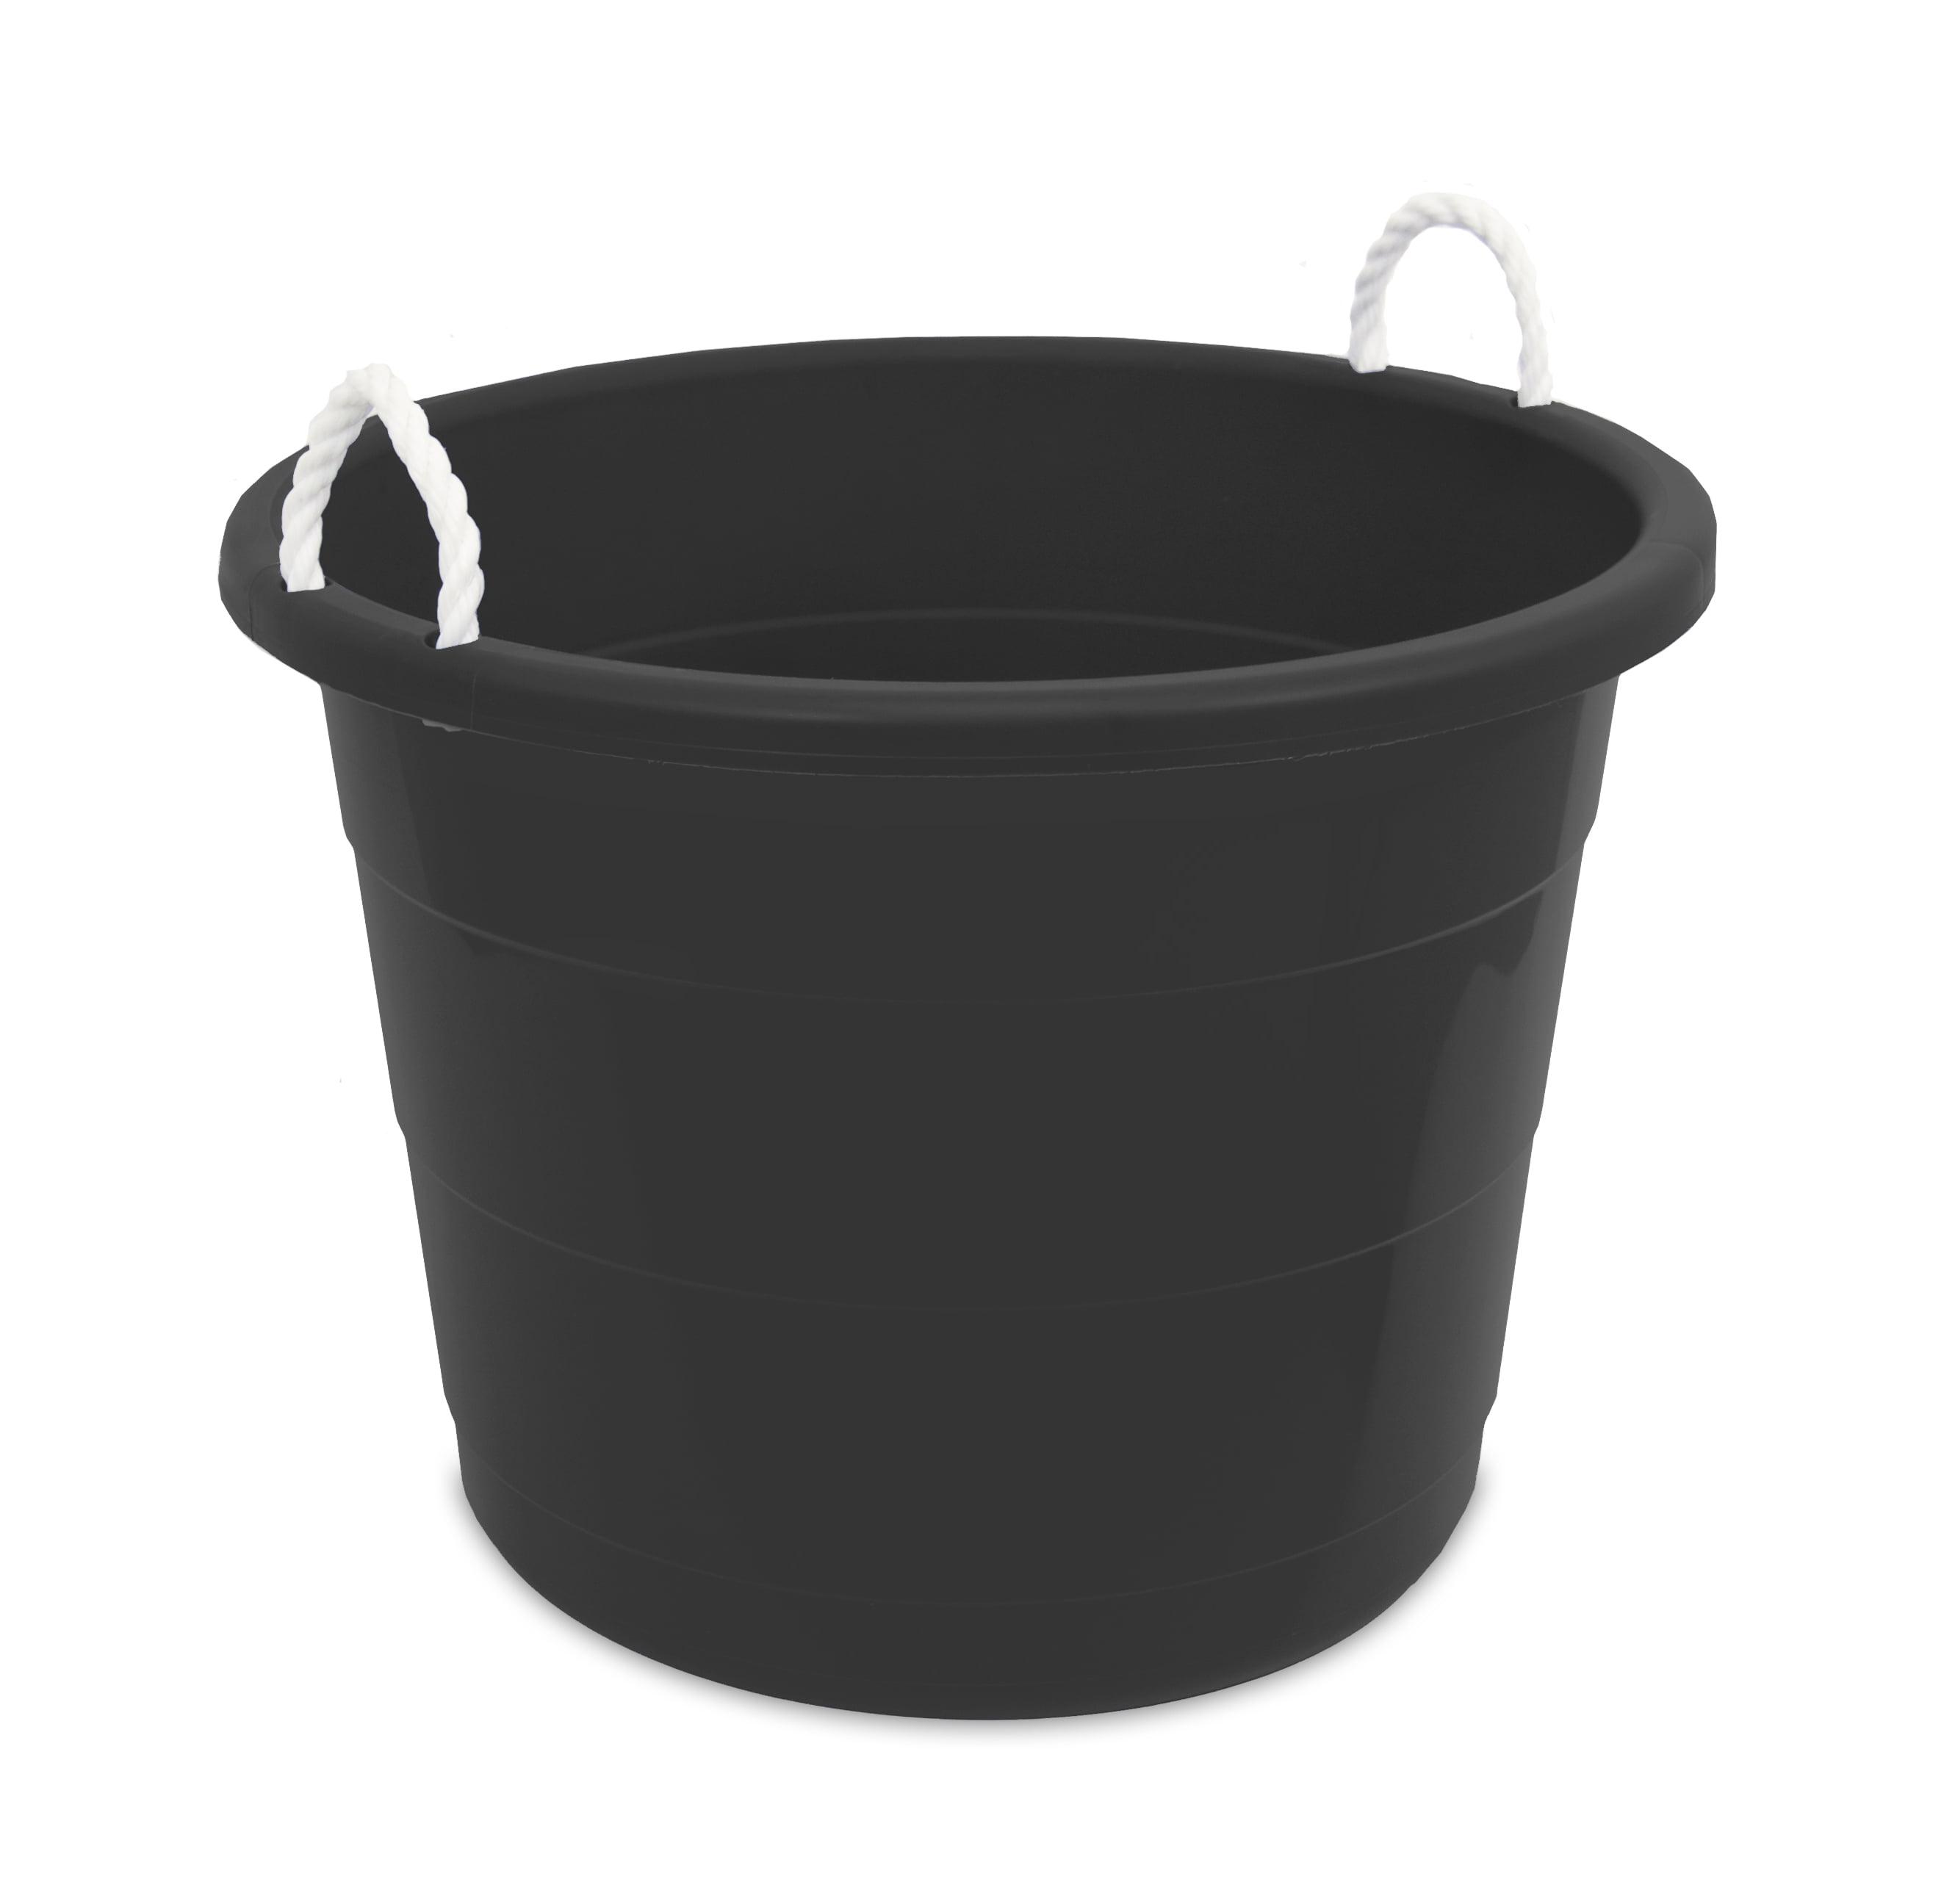 Mainstays Flexible Tub with Rope Handles - Plastic Durable